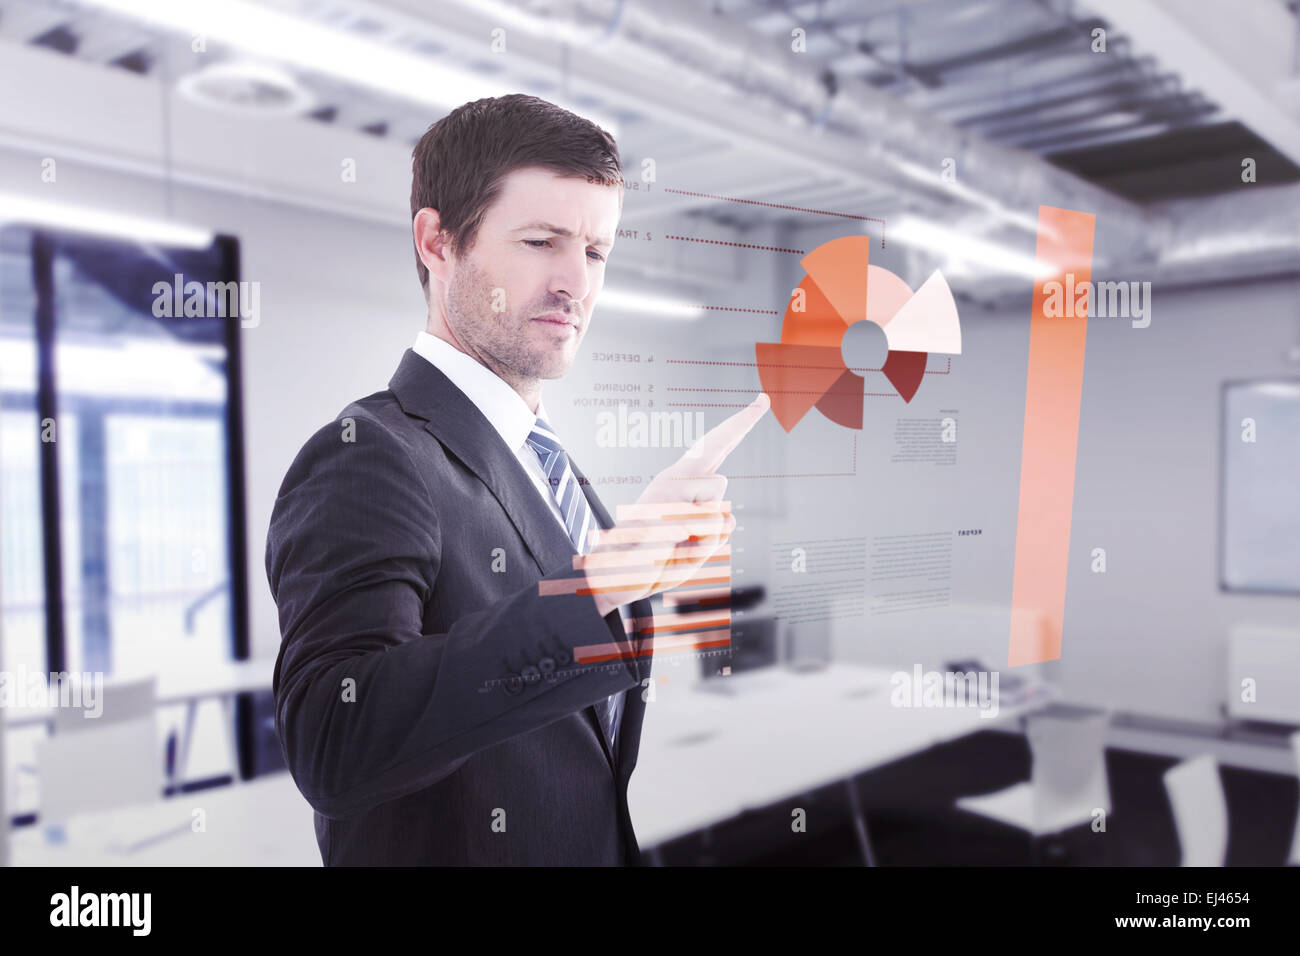 Composite image of businessman standing and pointing the finger Stock Photo